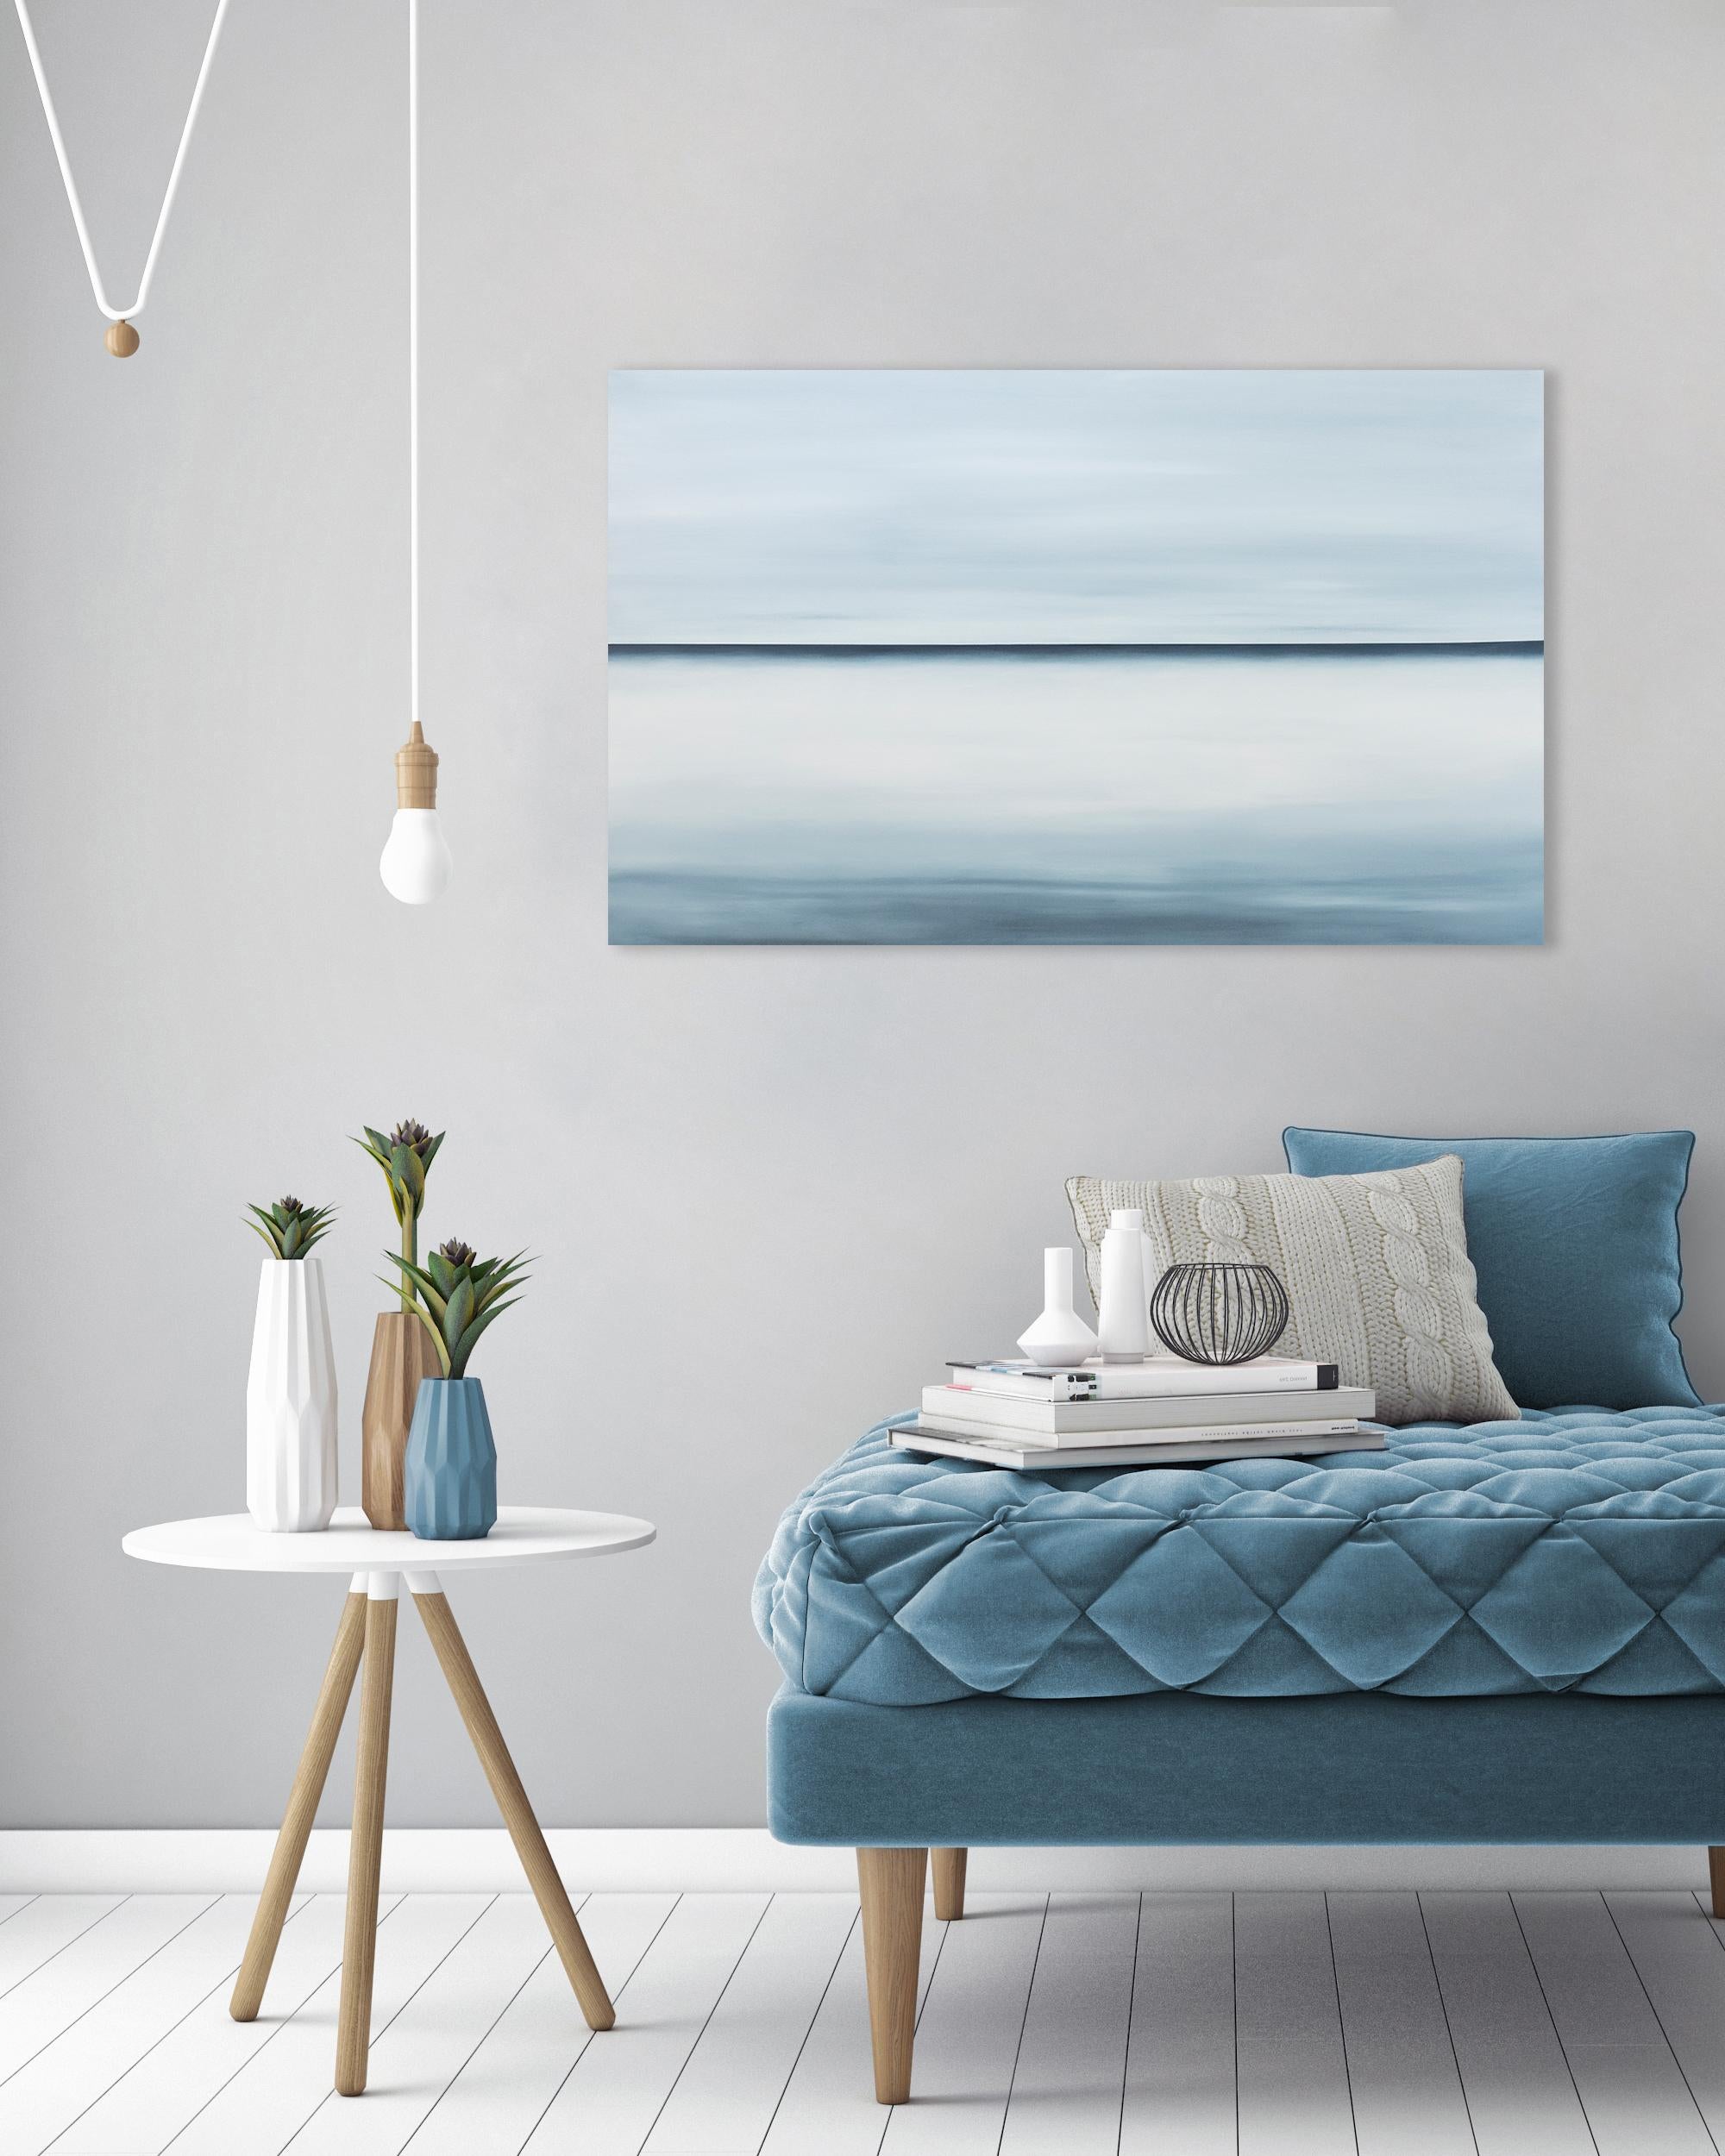 This abstract oil painting by Tony Iadicicco features a blue monochromatic palette. The painting has an abstracted landscape composition, with a stark blue horizon line running through the center of the canvas and soft blue blended colors above and